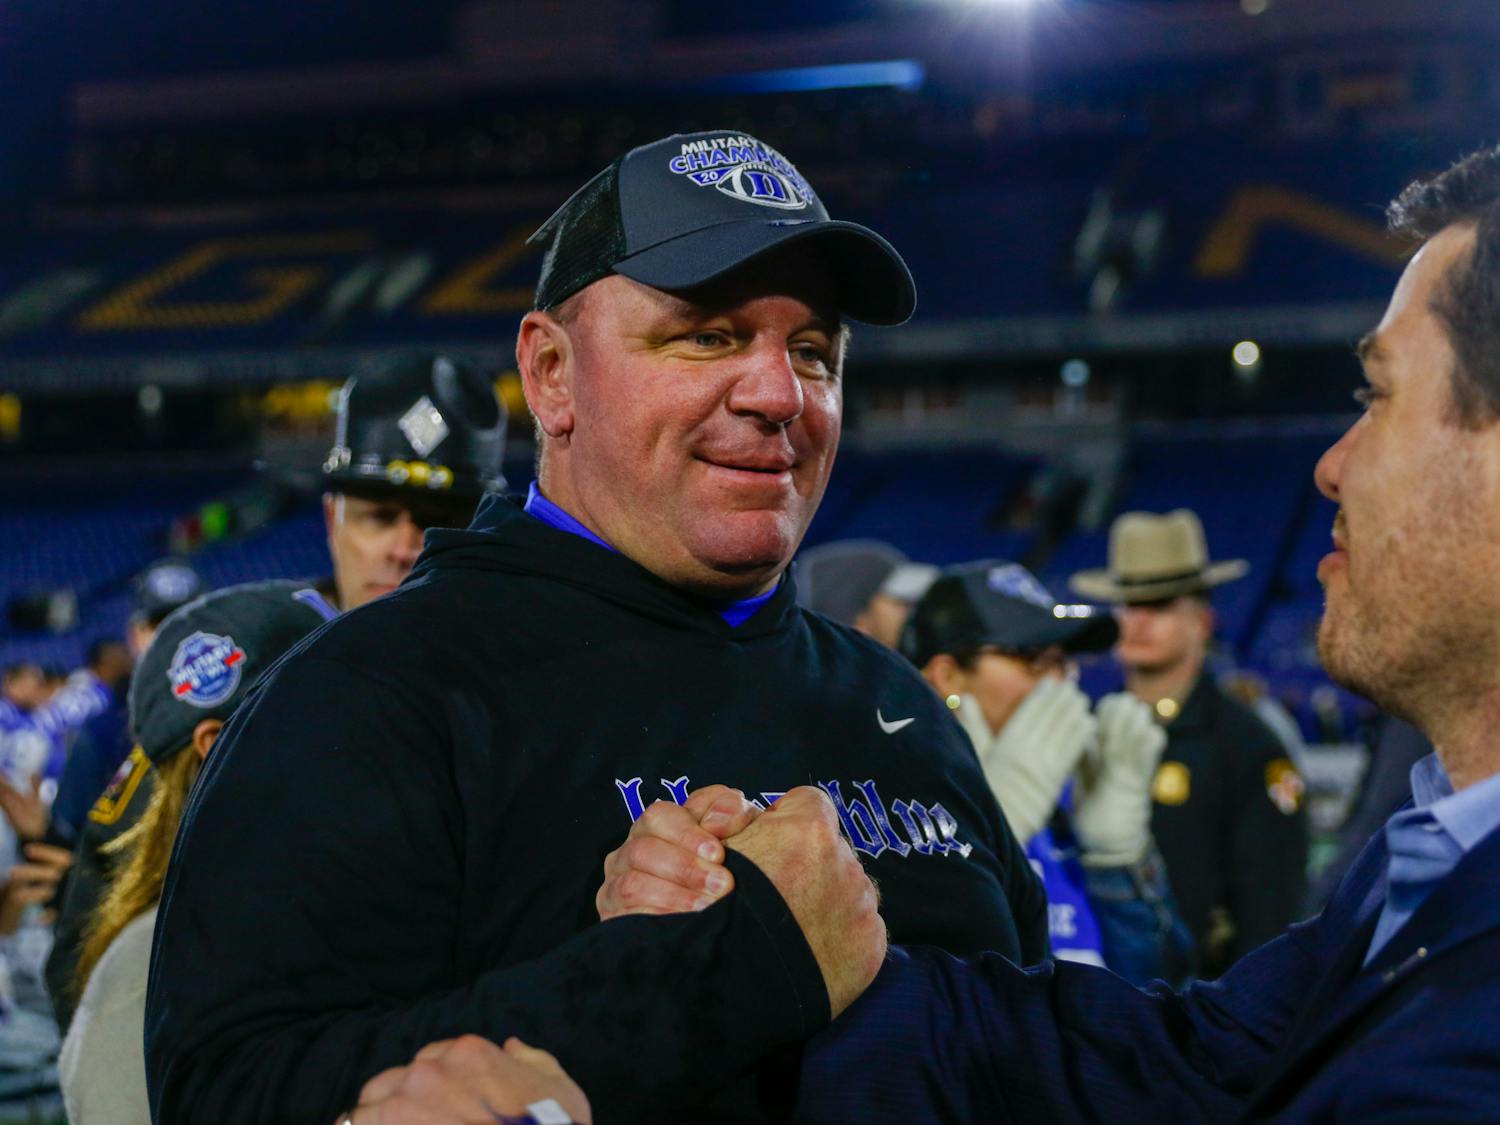 Mike Elko celebrates with the Blue Devils on the field after winning the Military Bowl.